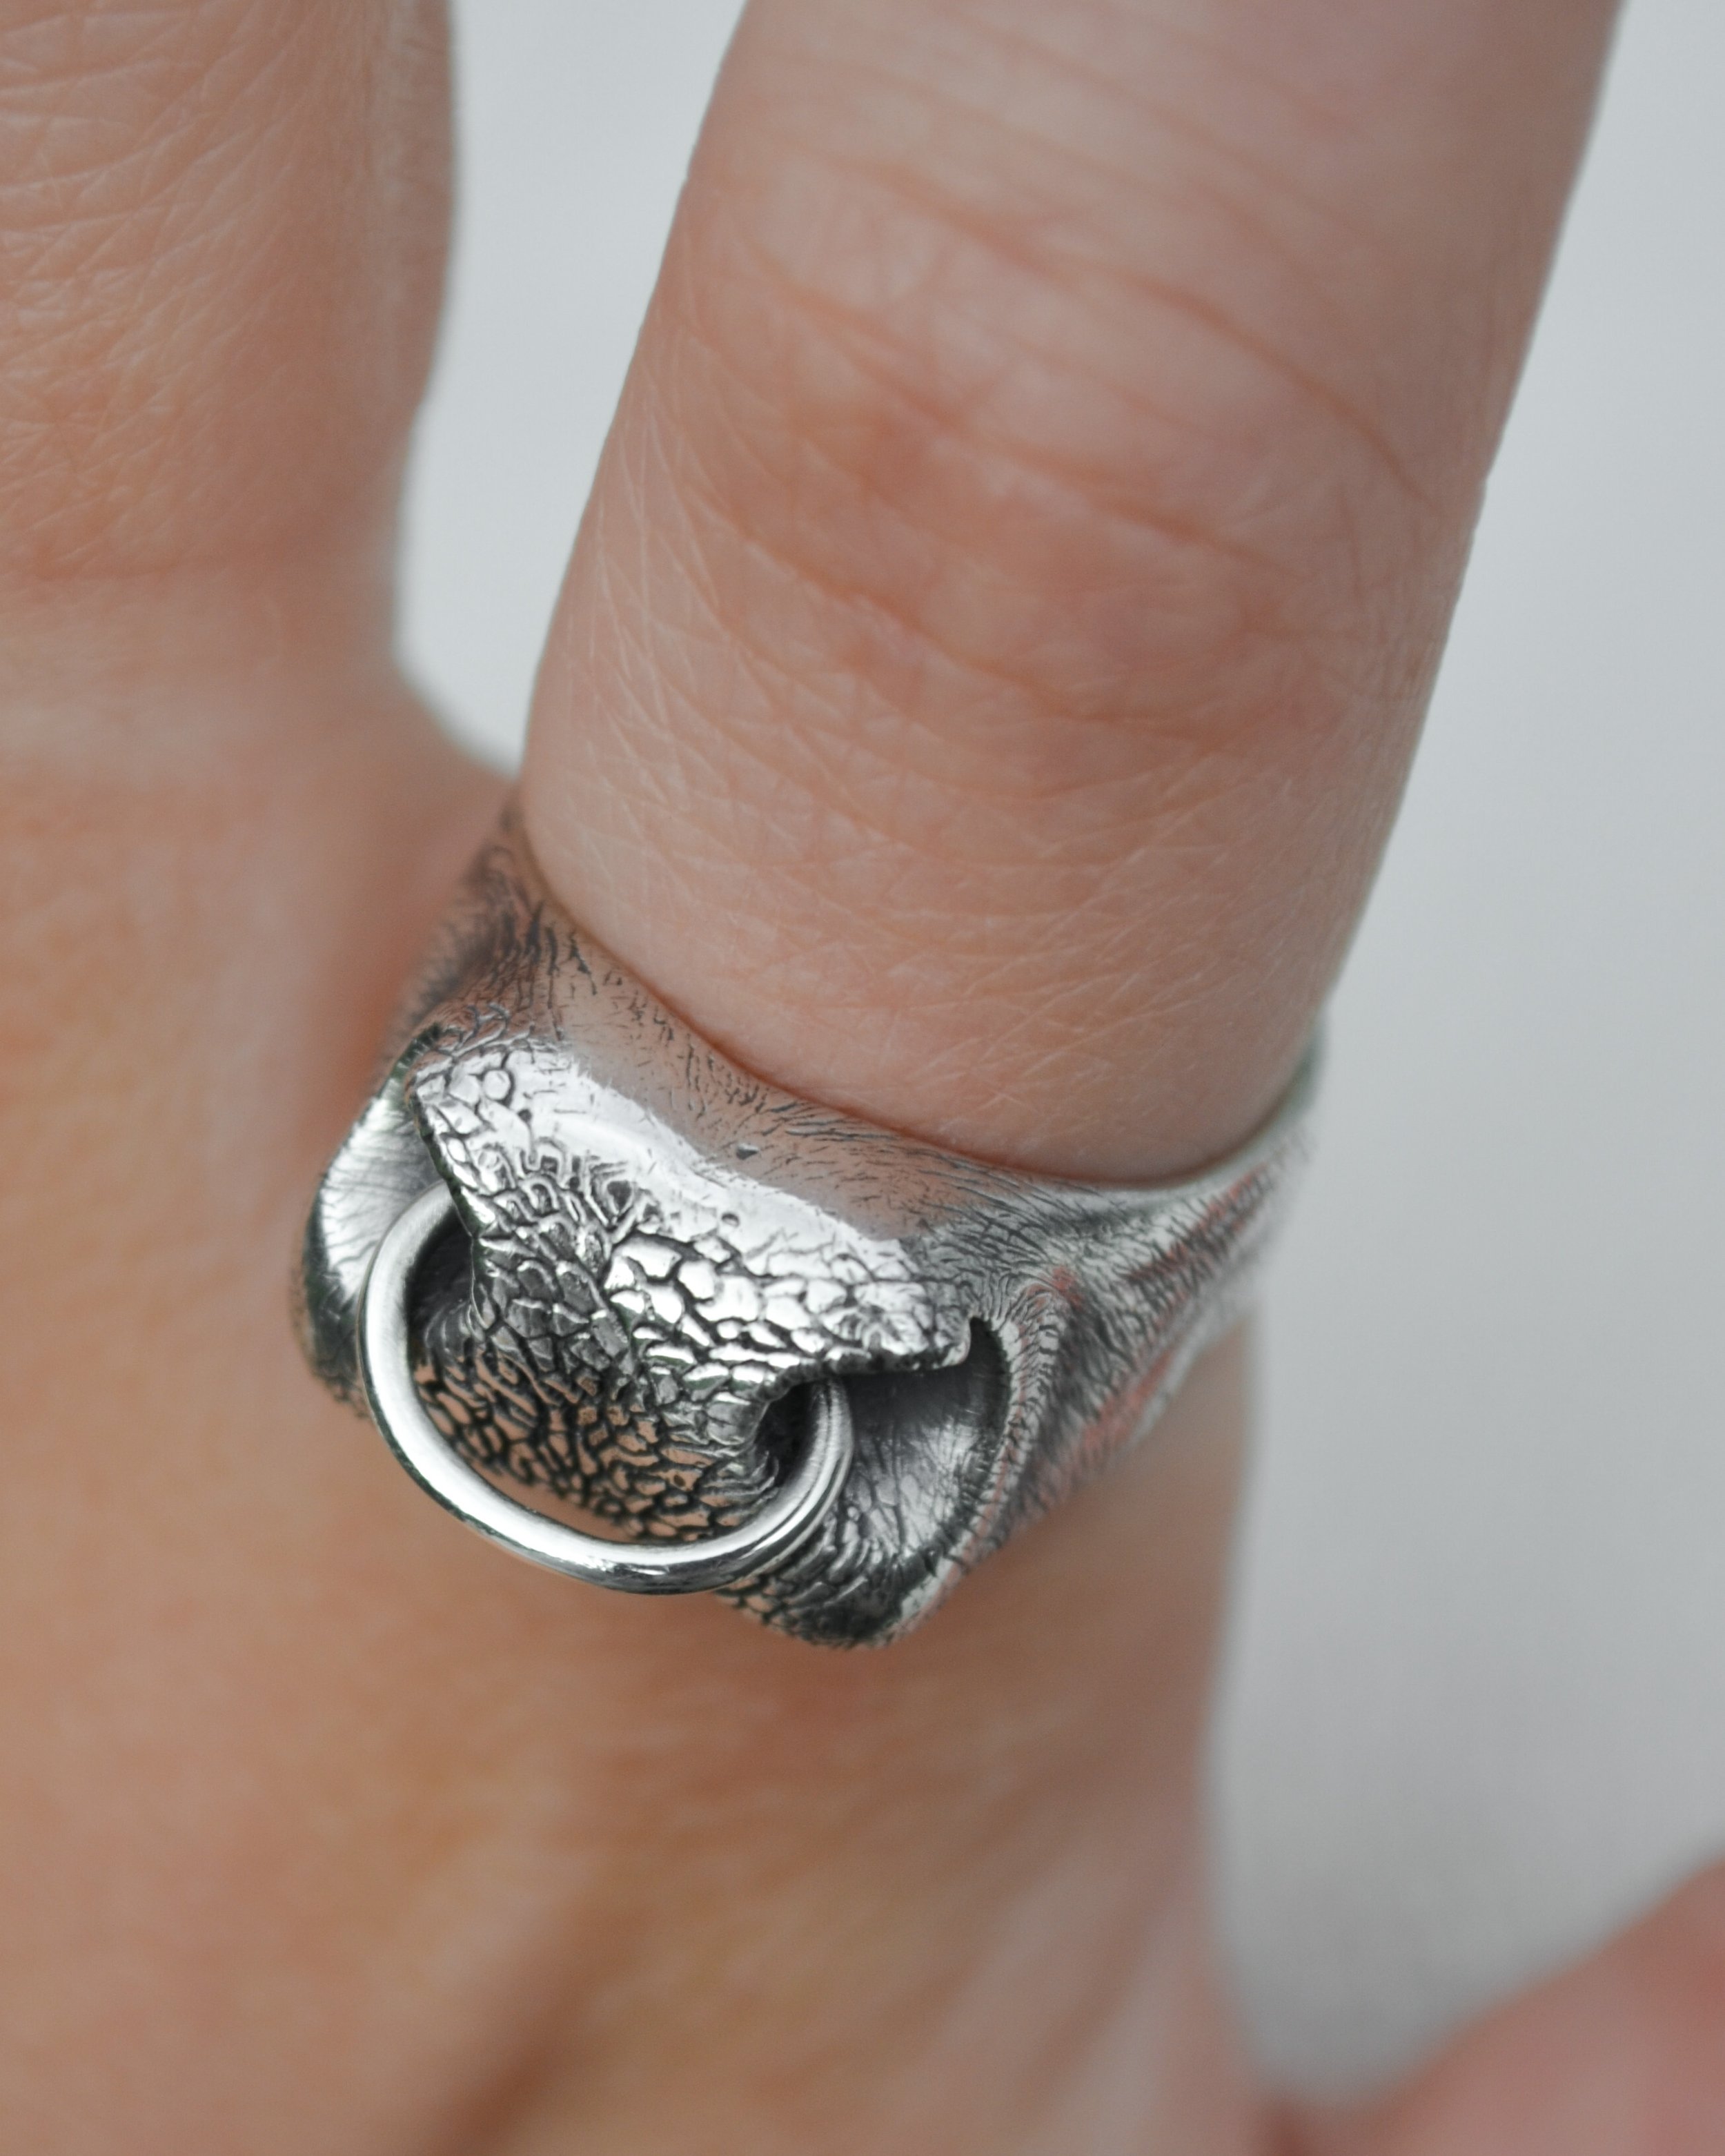 Nickel plated Bull nose ring